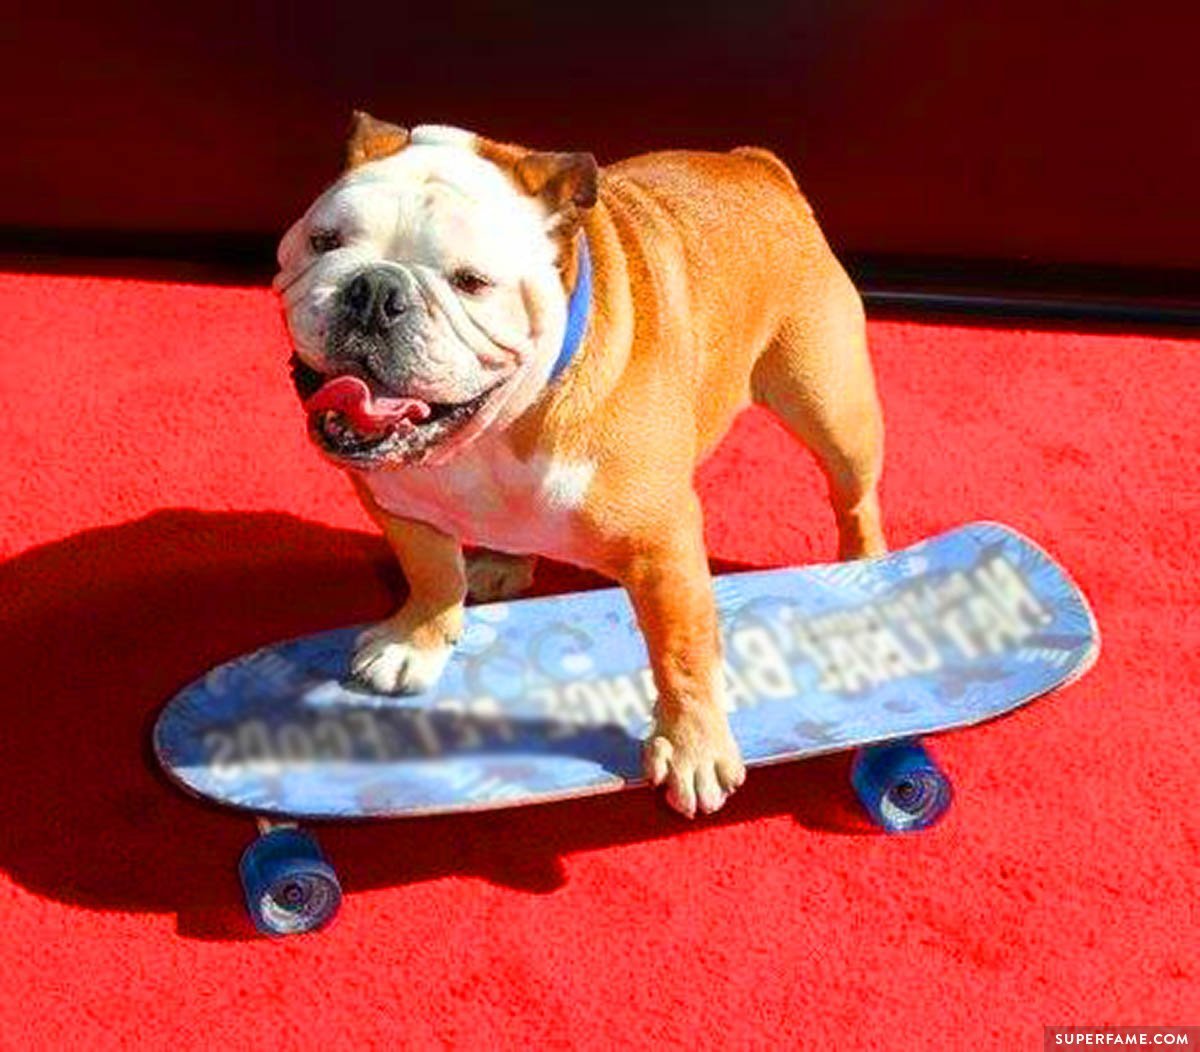 Dog on the red carpet.